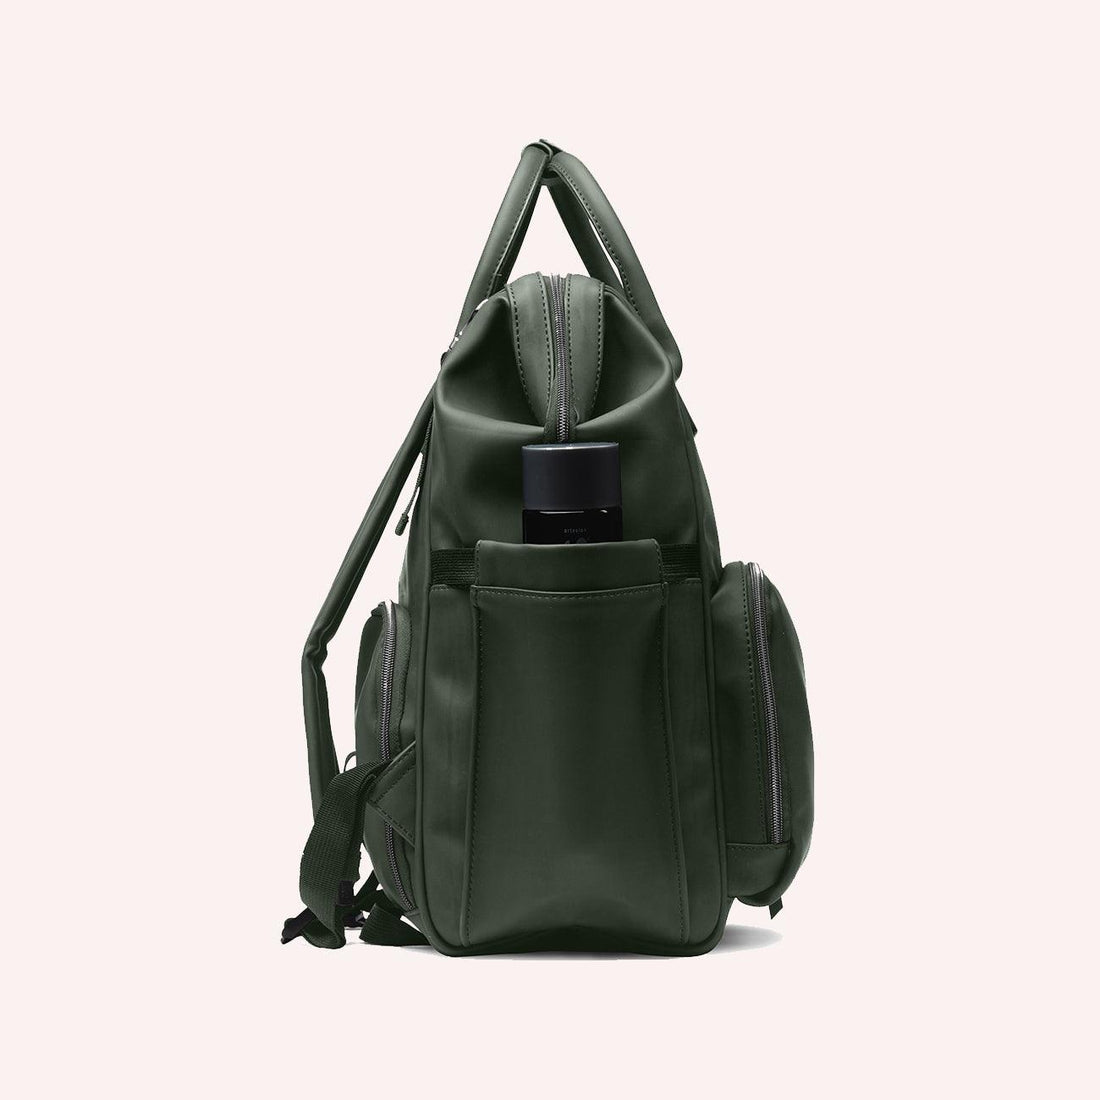 Active X Unisex Baby Backpack - Olive Green